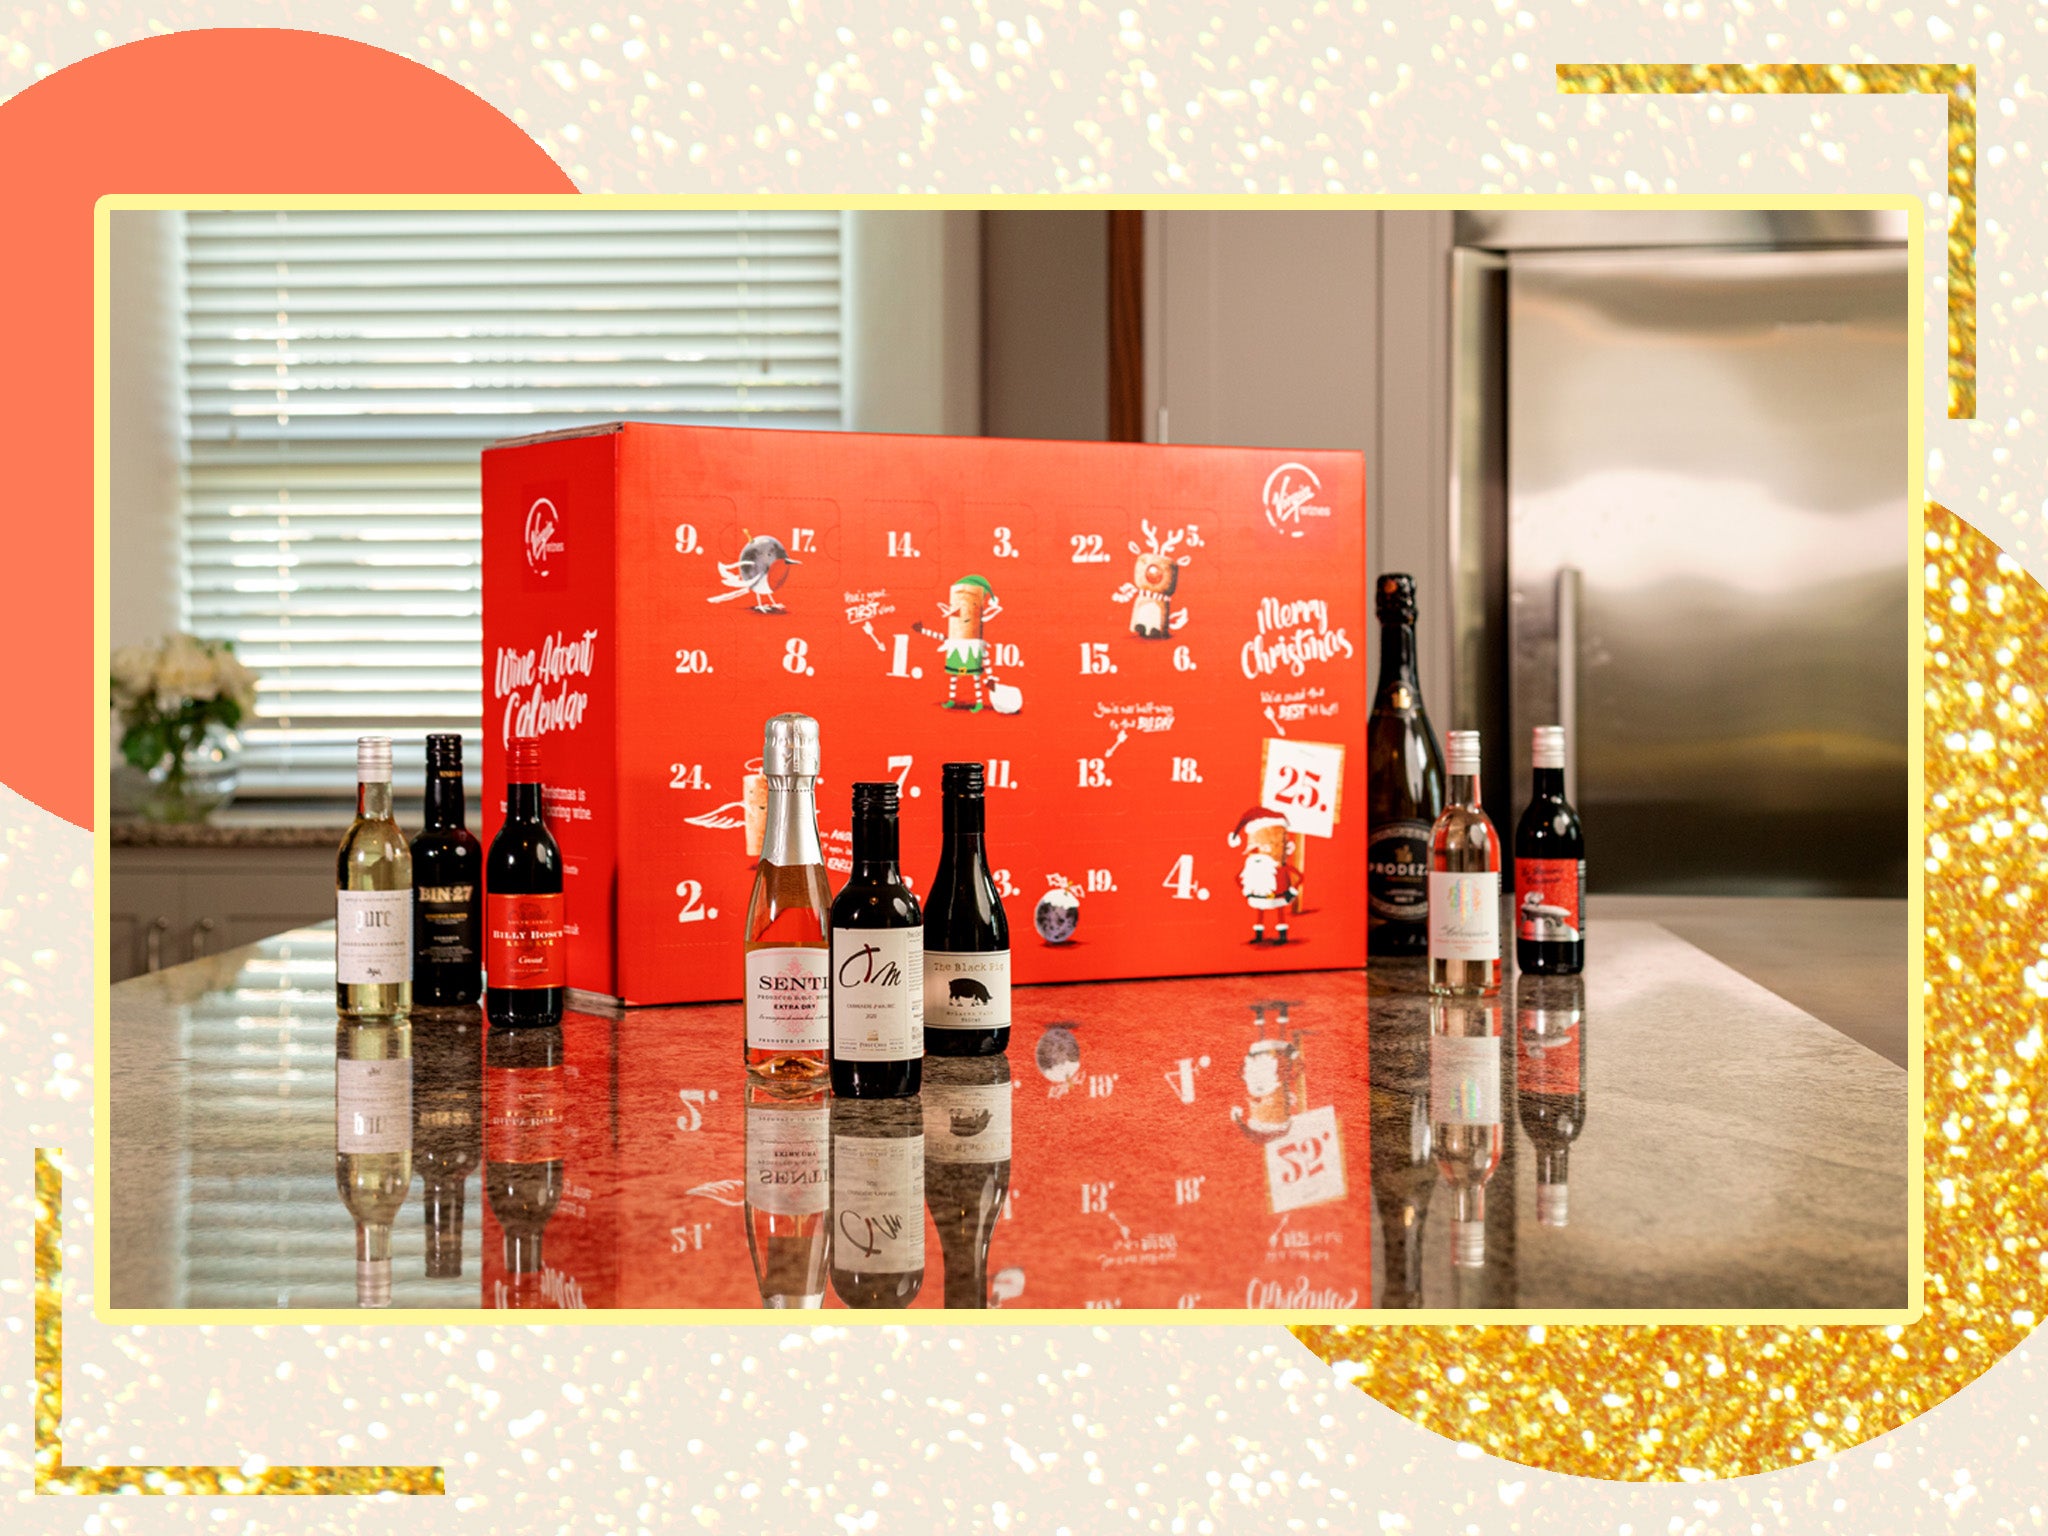 We expect these to sell out fast – pre-order your festive vinos now so you don’t miss out